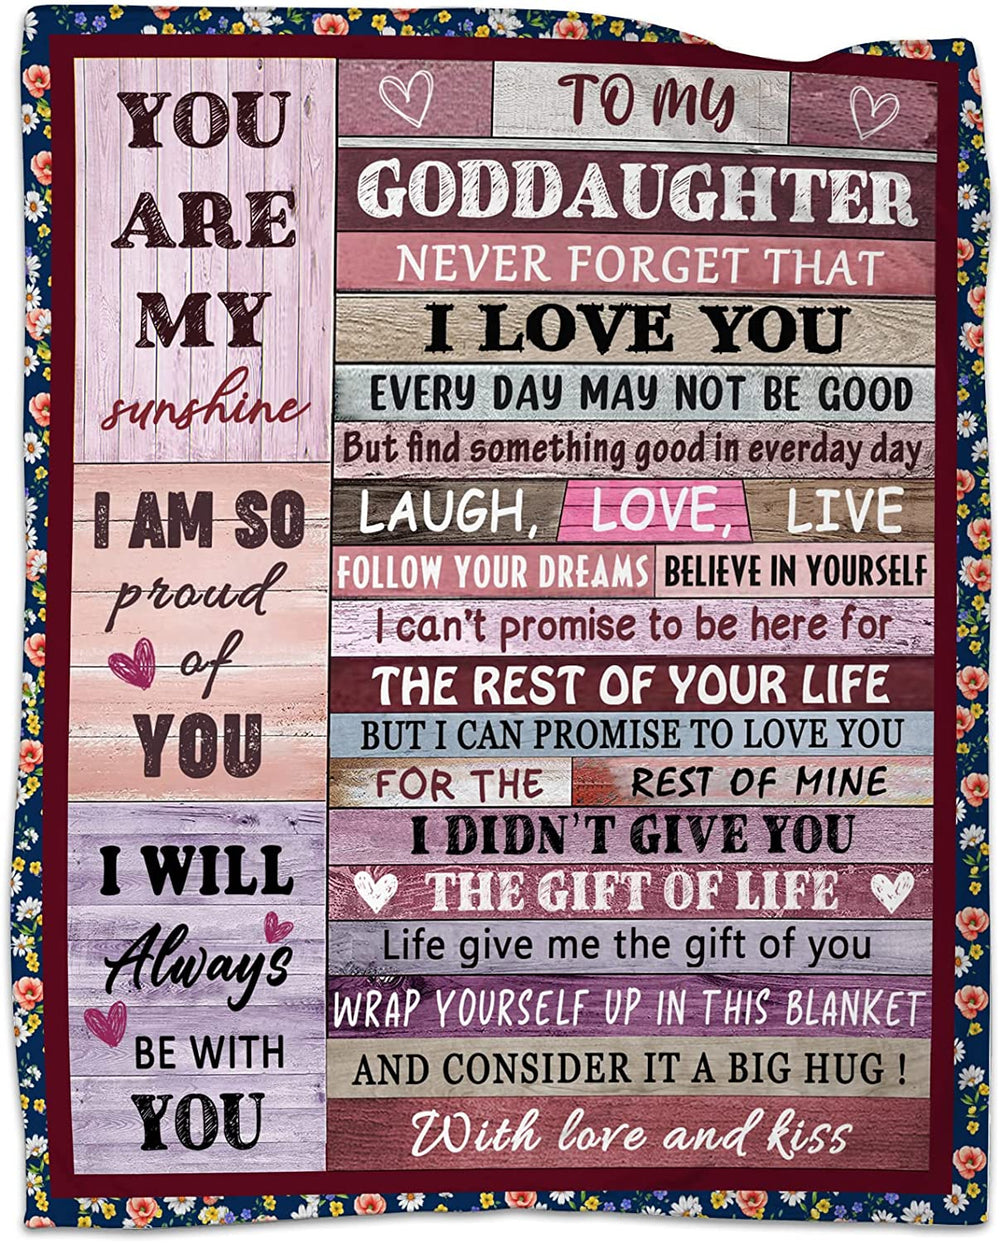 Christian Gifts for Christmas Birthday: Goddaughter Throw Blanket with Believe Design from Godmother and Godfather – JEB018